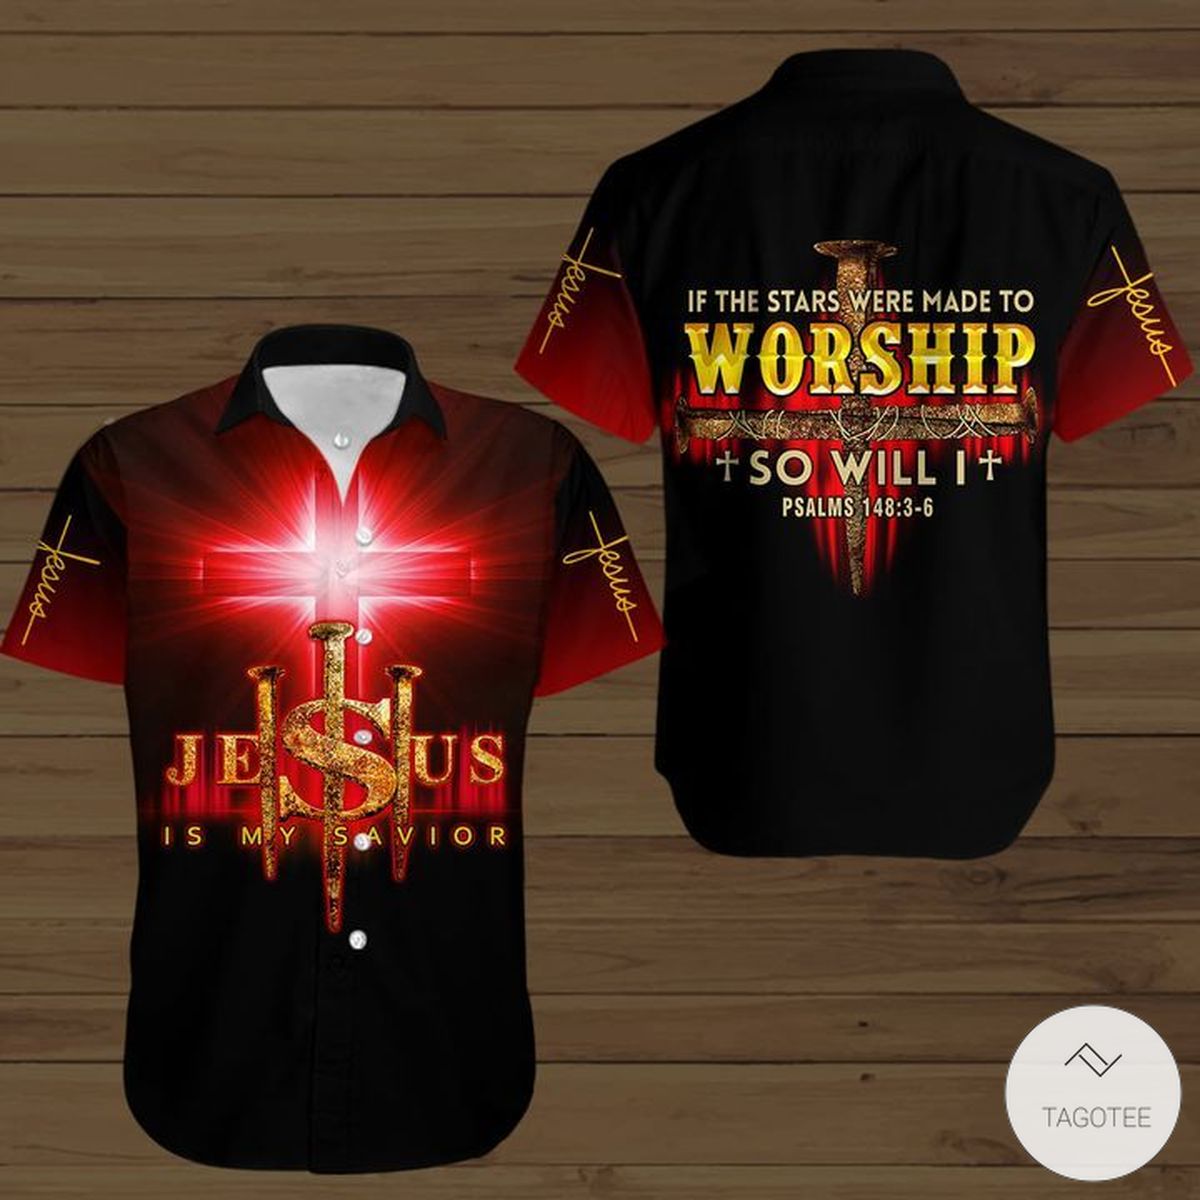 Jesus-Is-My-Savior-If-The-Stars-Were-Made-To-Worship-So-Will-I-Button-Shirt